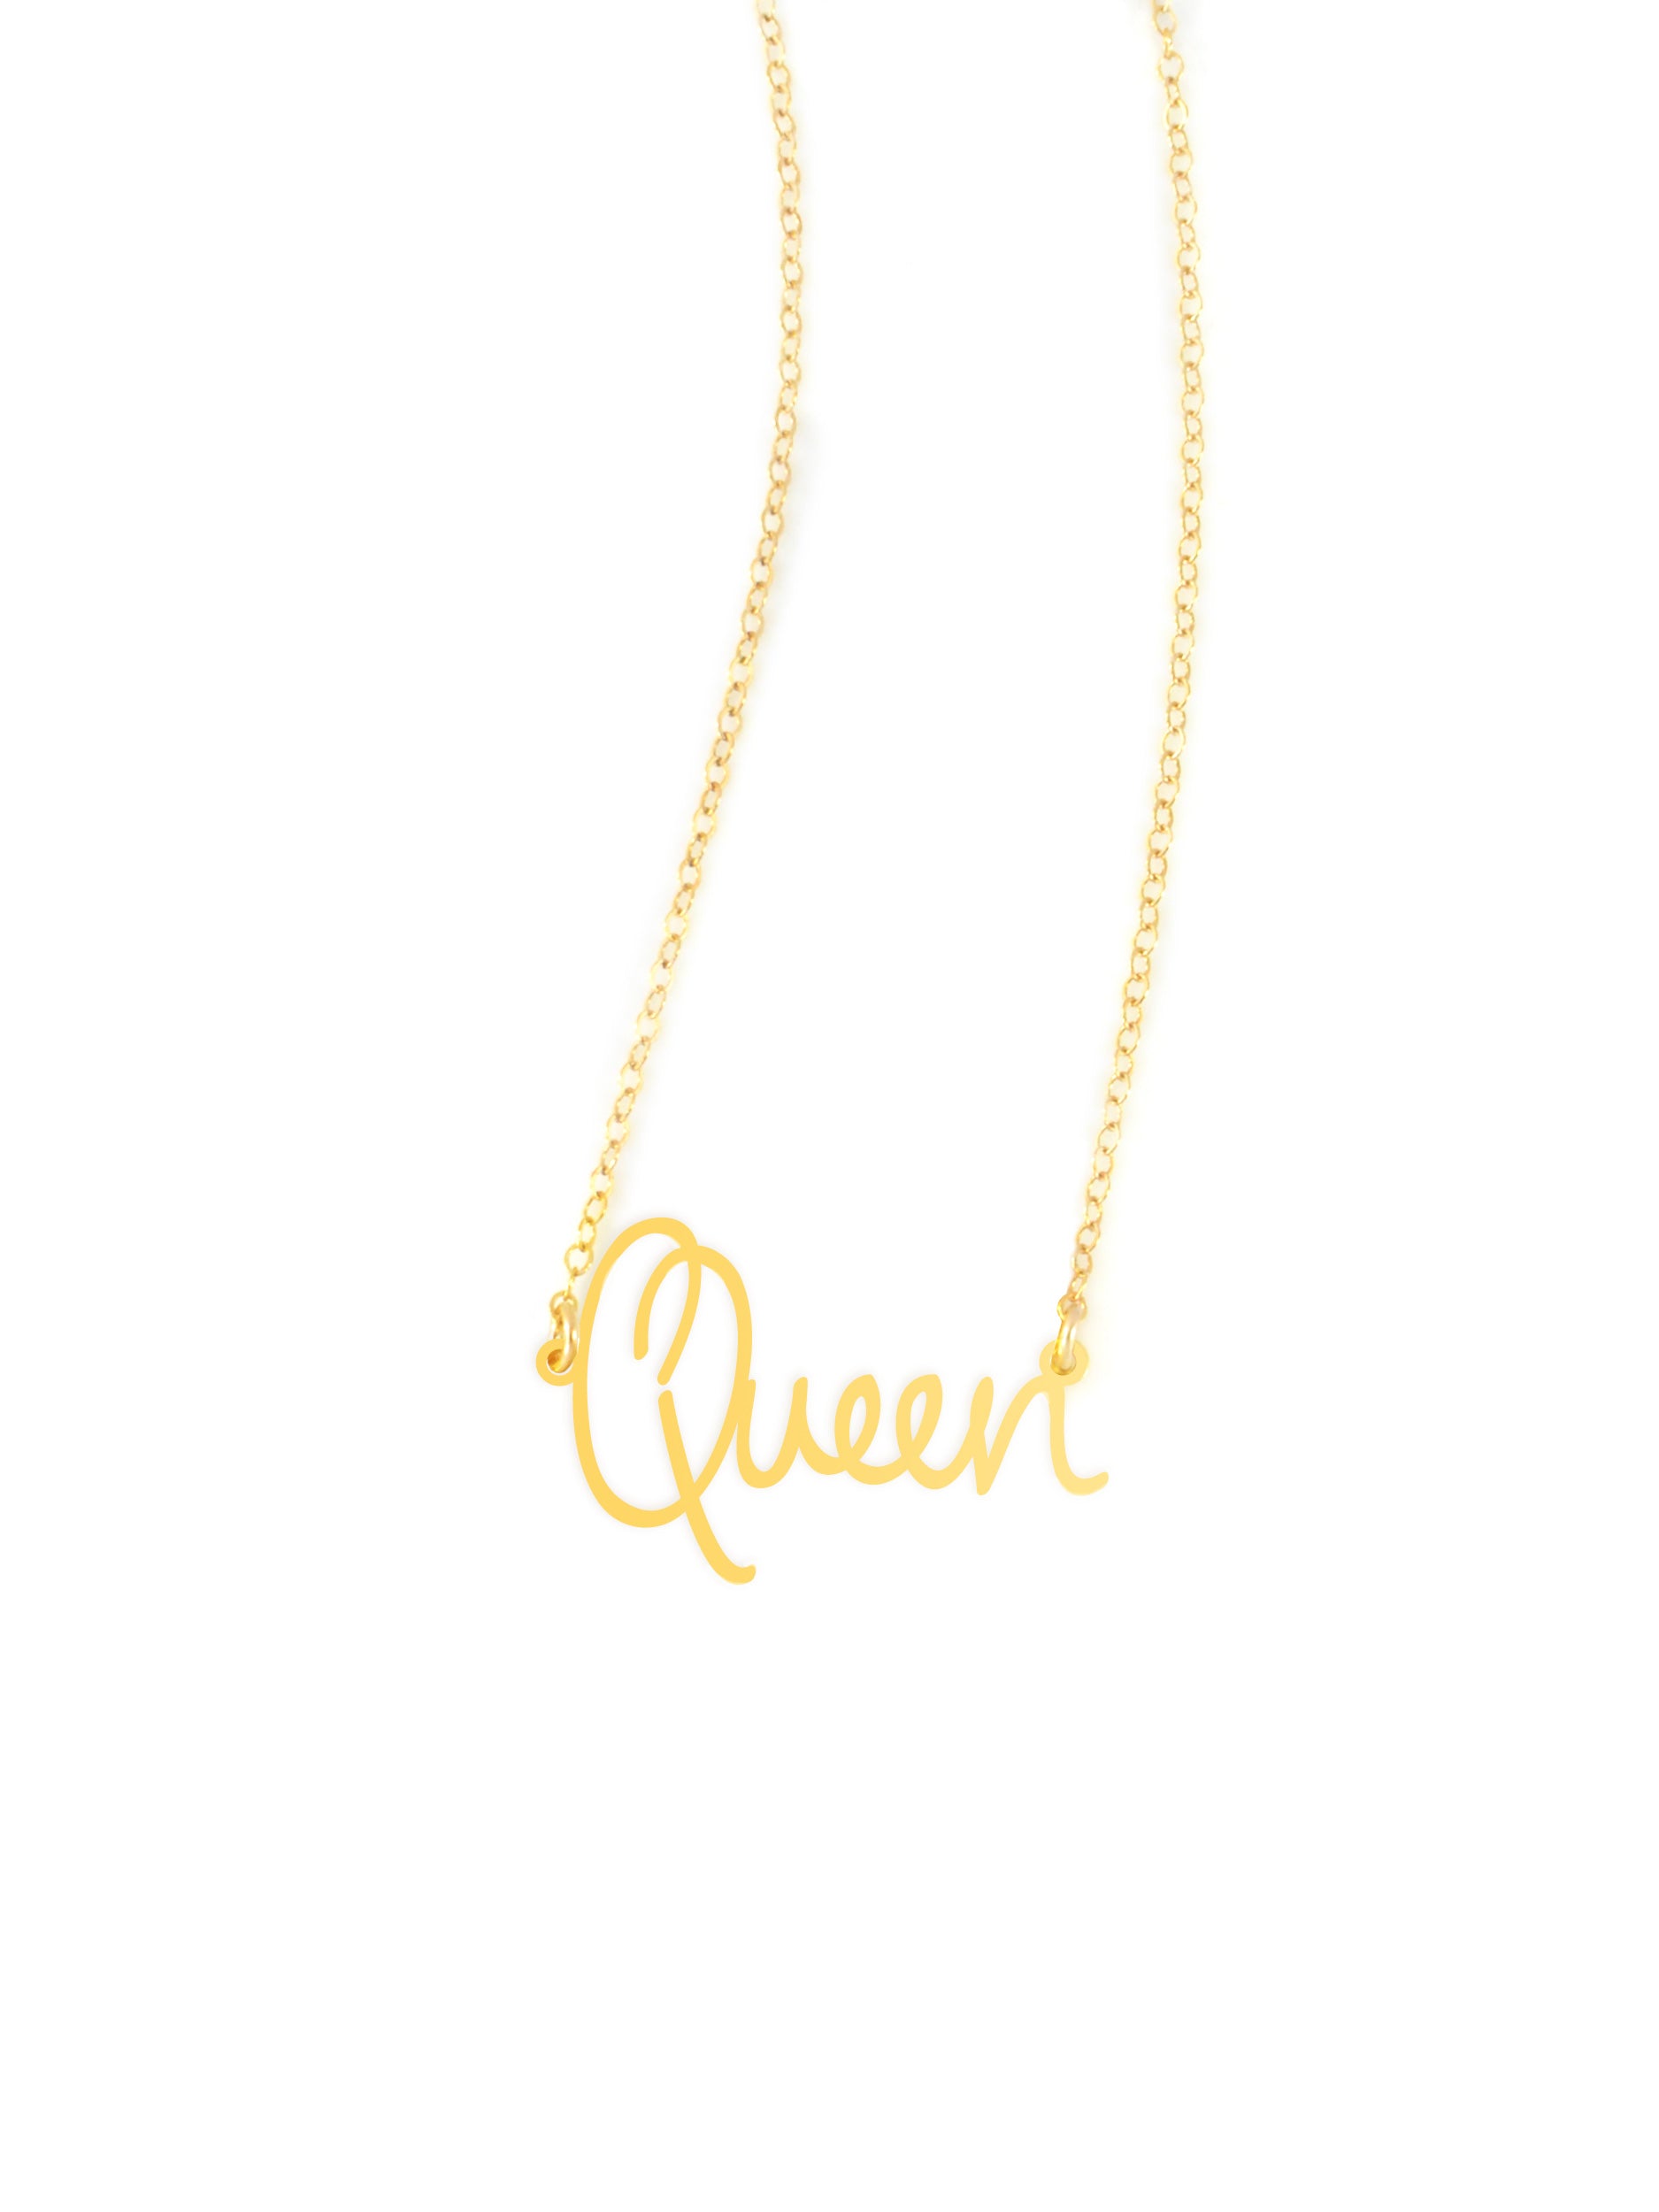 Queen Necklace - High Quality, Affordable, Hand Written, Empowering, Self Love, Mantra Word Necklace - Available in Gold and Silver - Small and Large Sizes - Made in USA - Brevity Jewelry